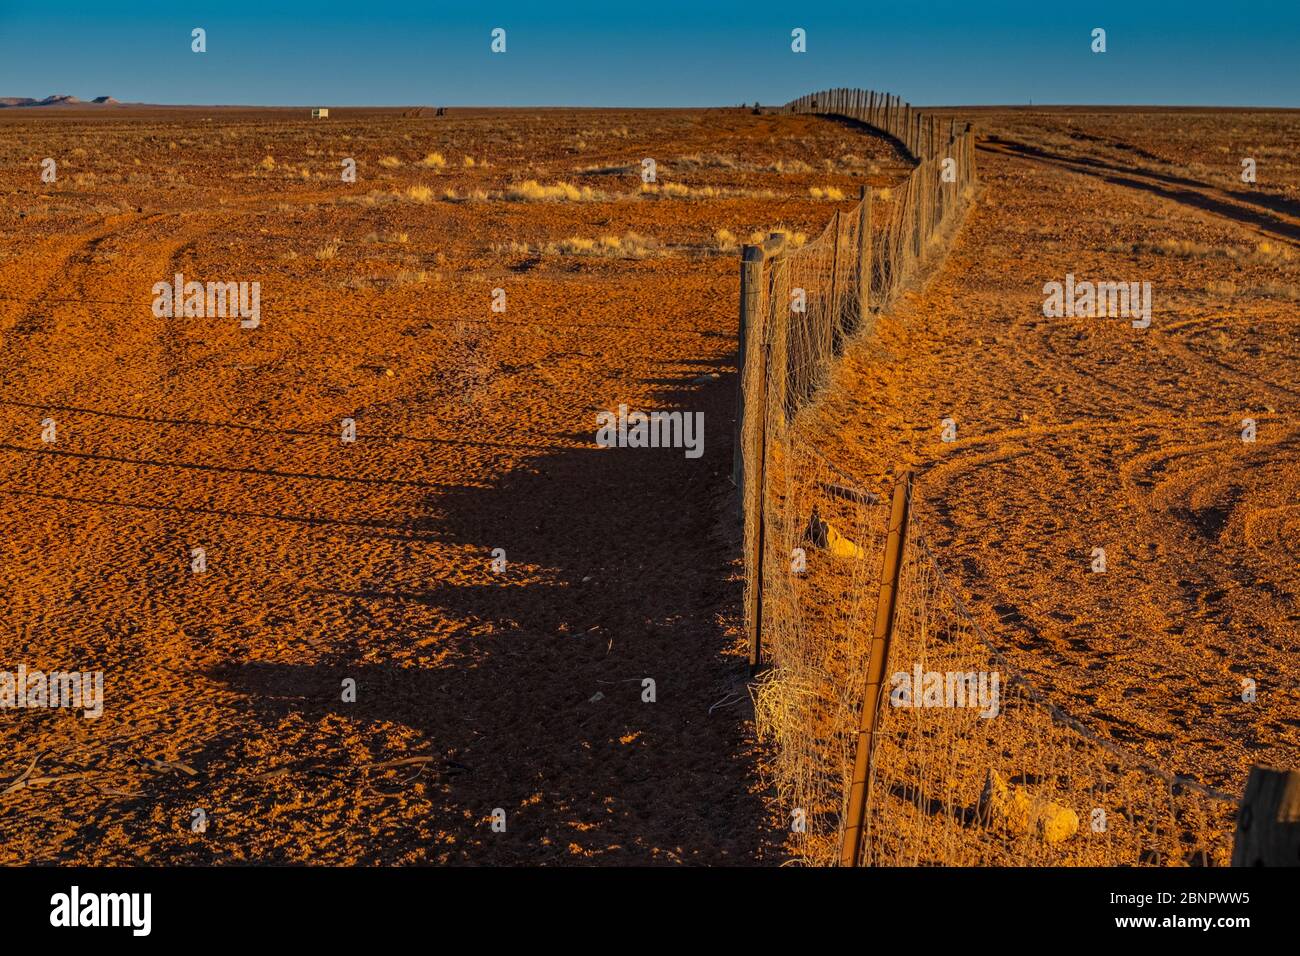 View along a section of the famous Dingo Fence or Dog Fence at Coober Pedy, South Australia, Outback. Stock Photo